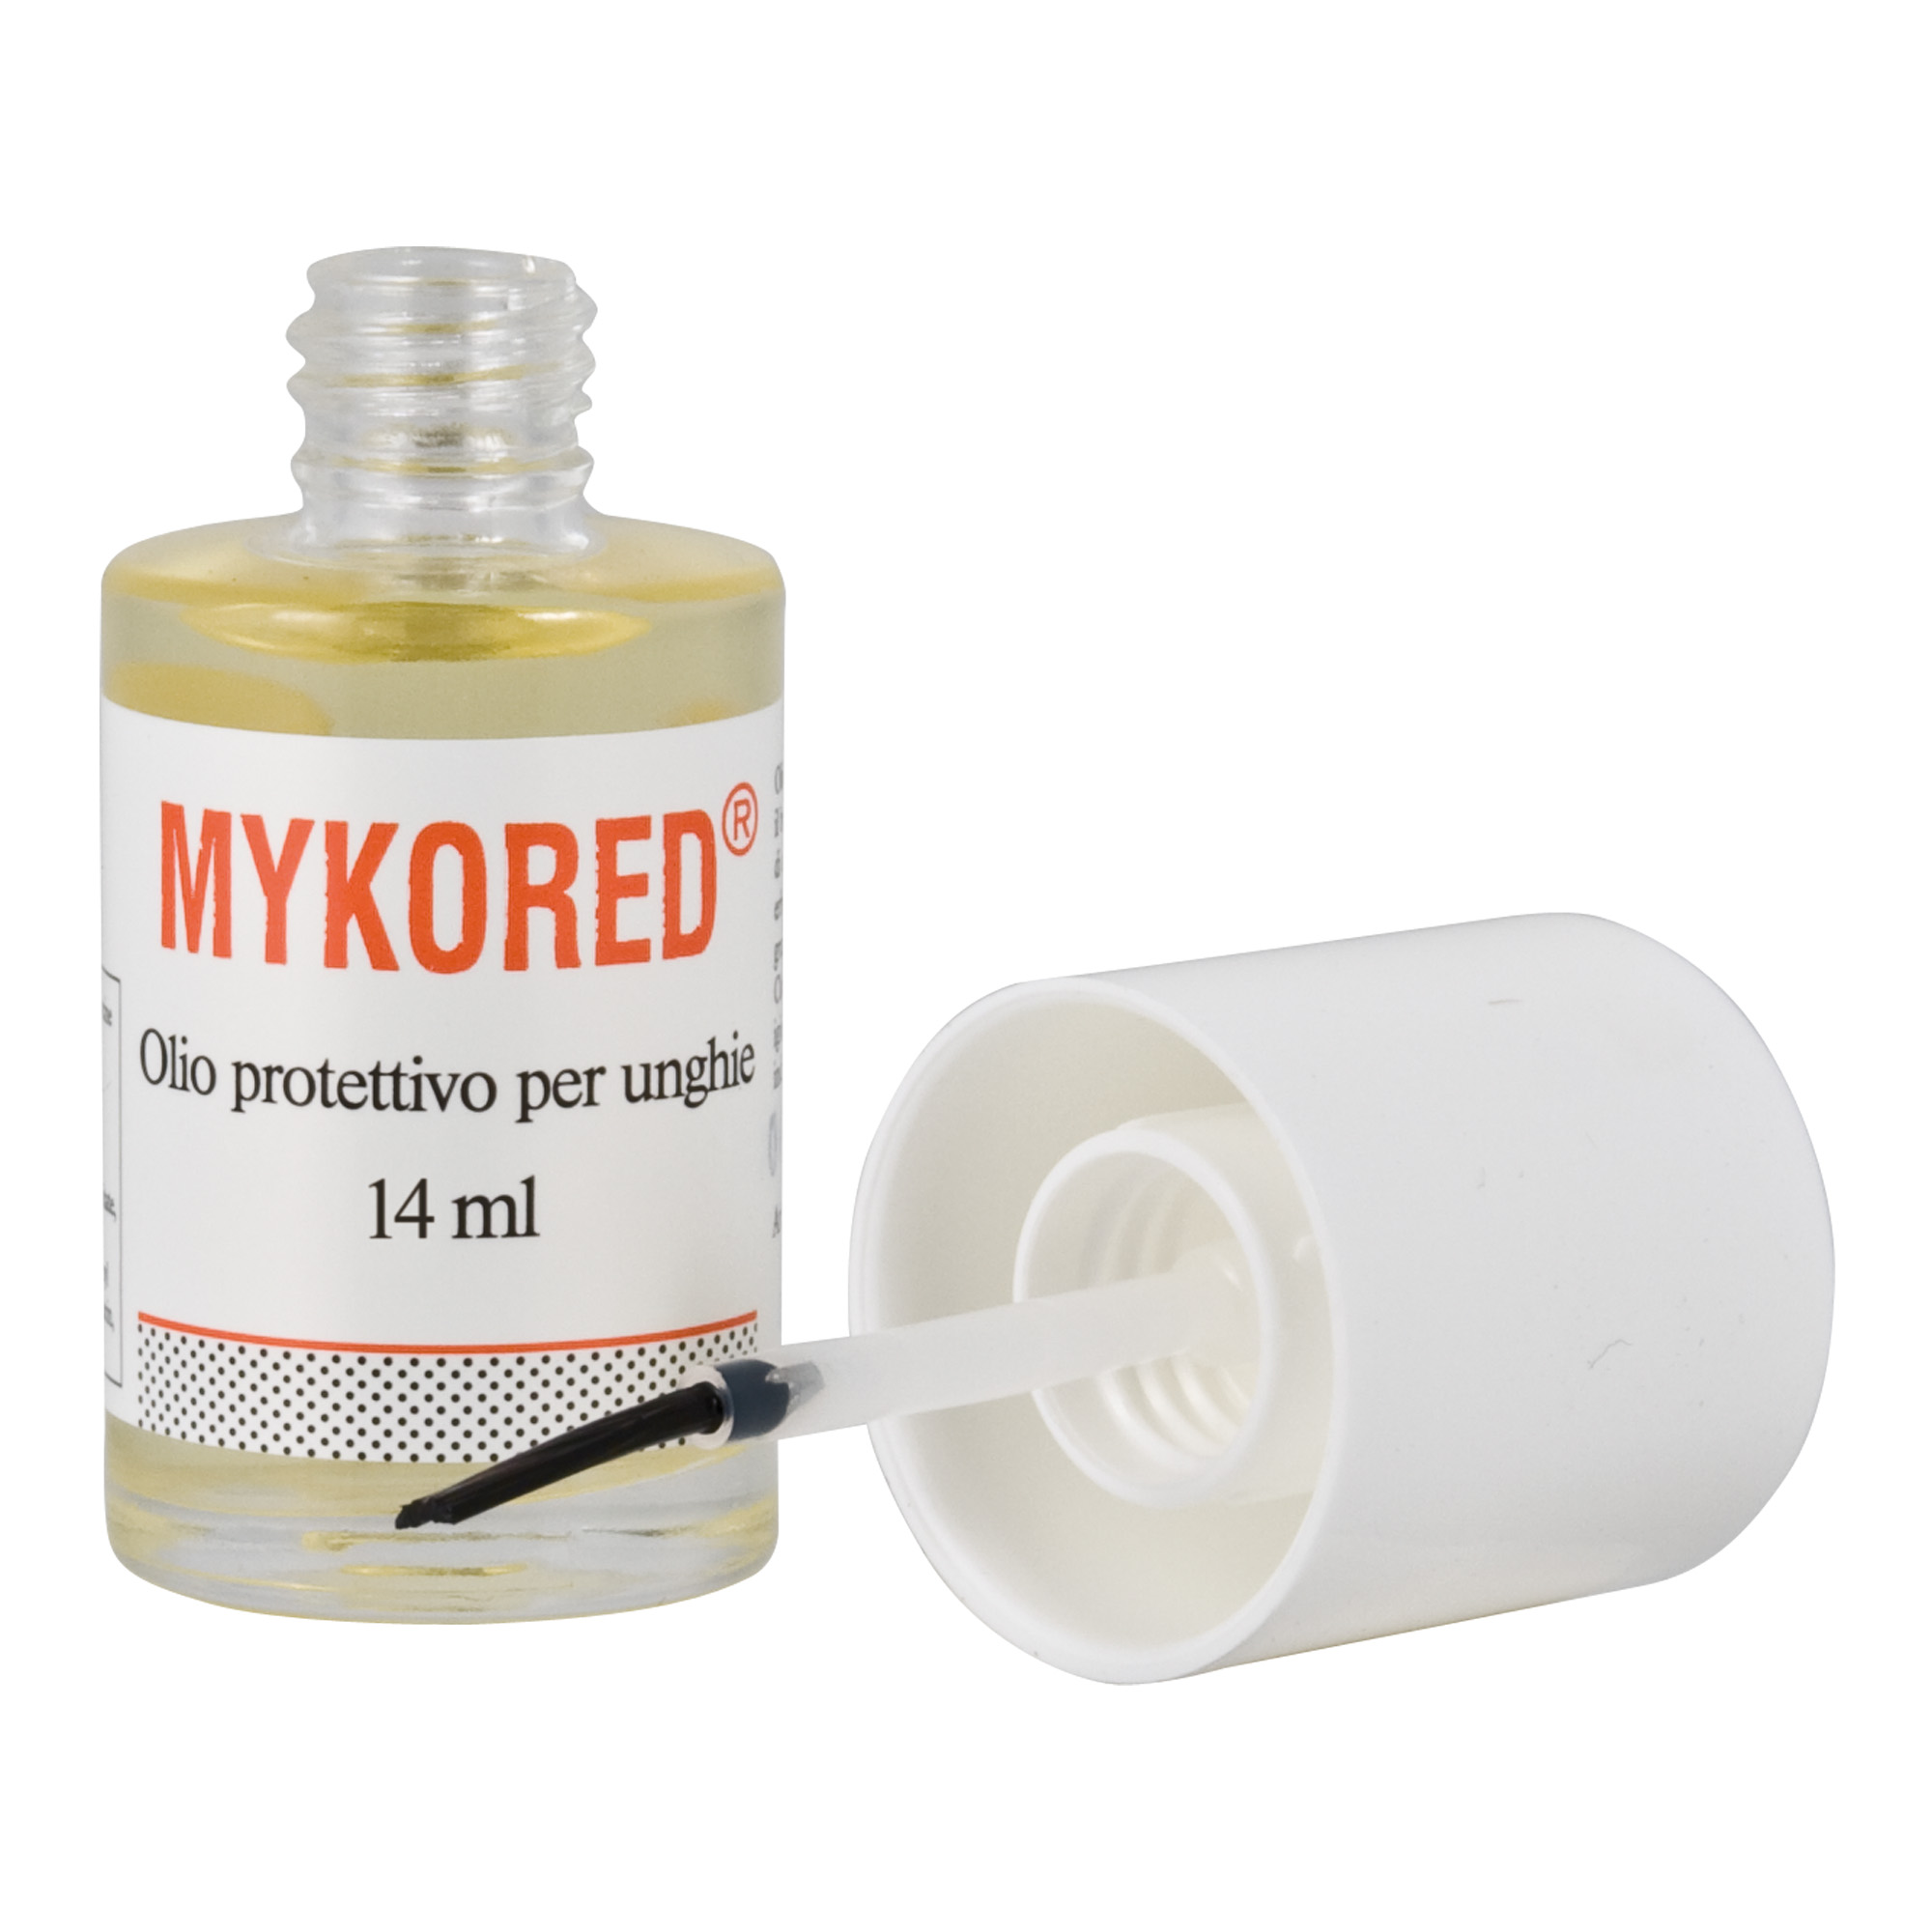 Huile protectrice pour ongles Mykored 14 ml